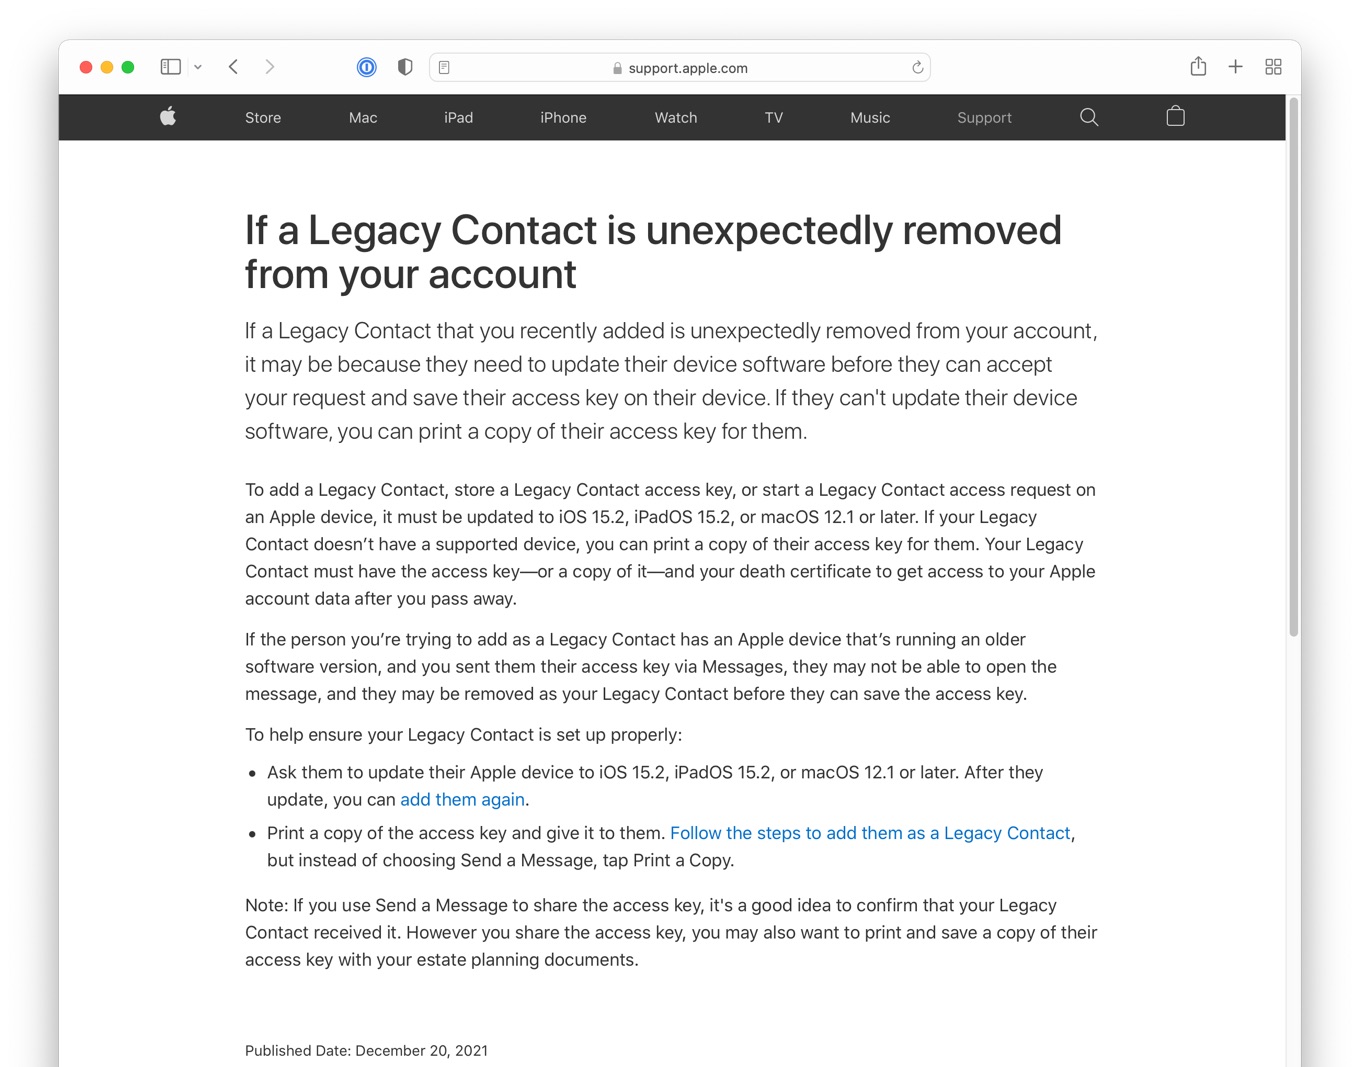 If a Legacy Contact is unexpectedly removed from your account - Apple Support